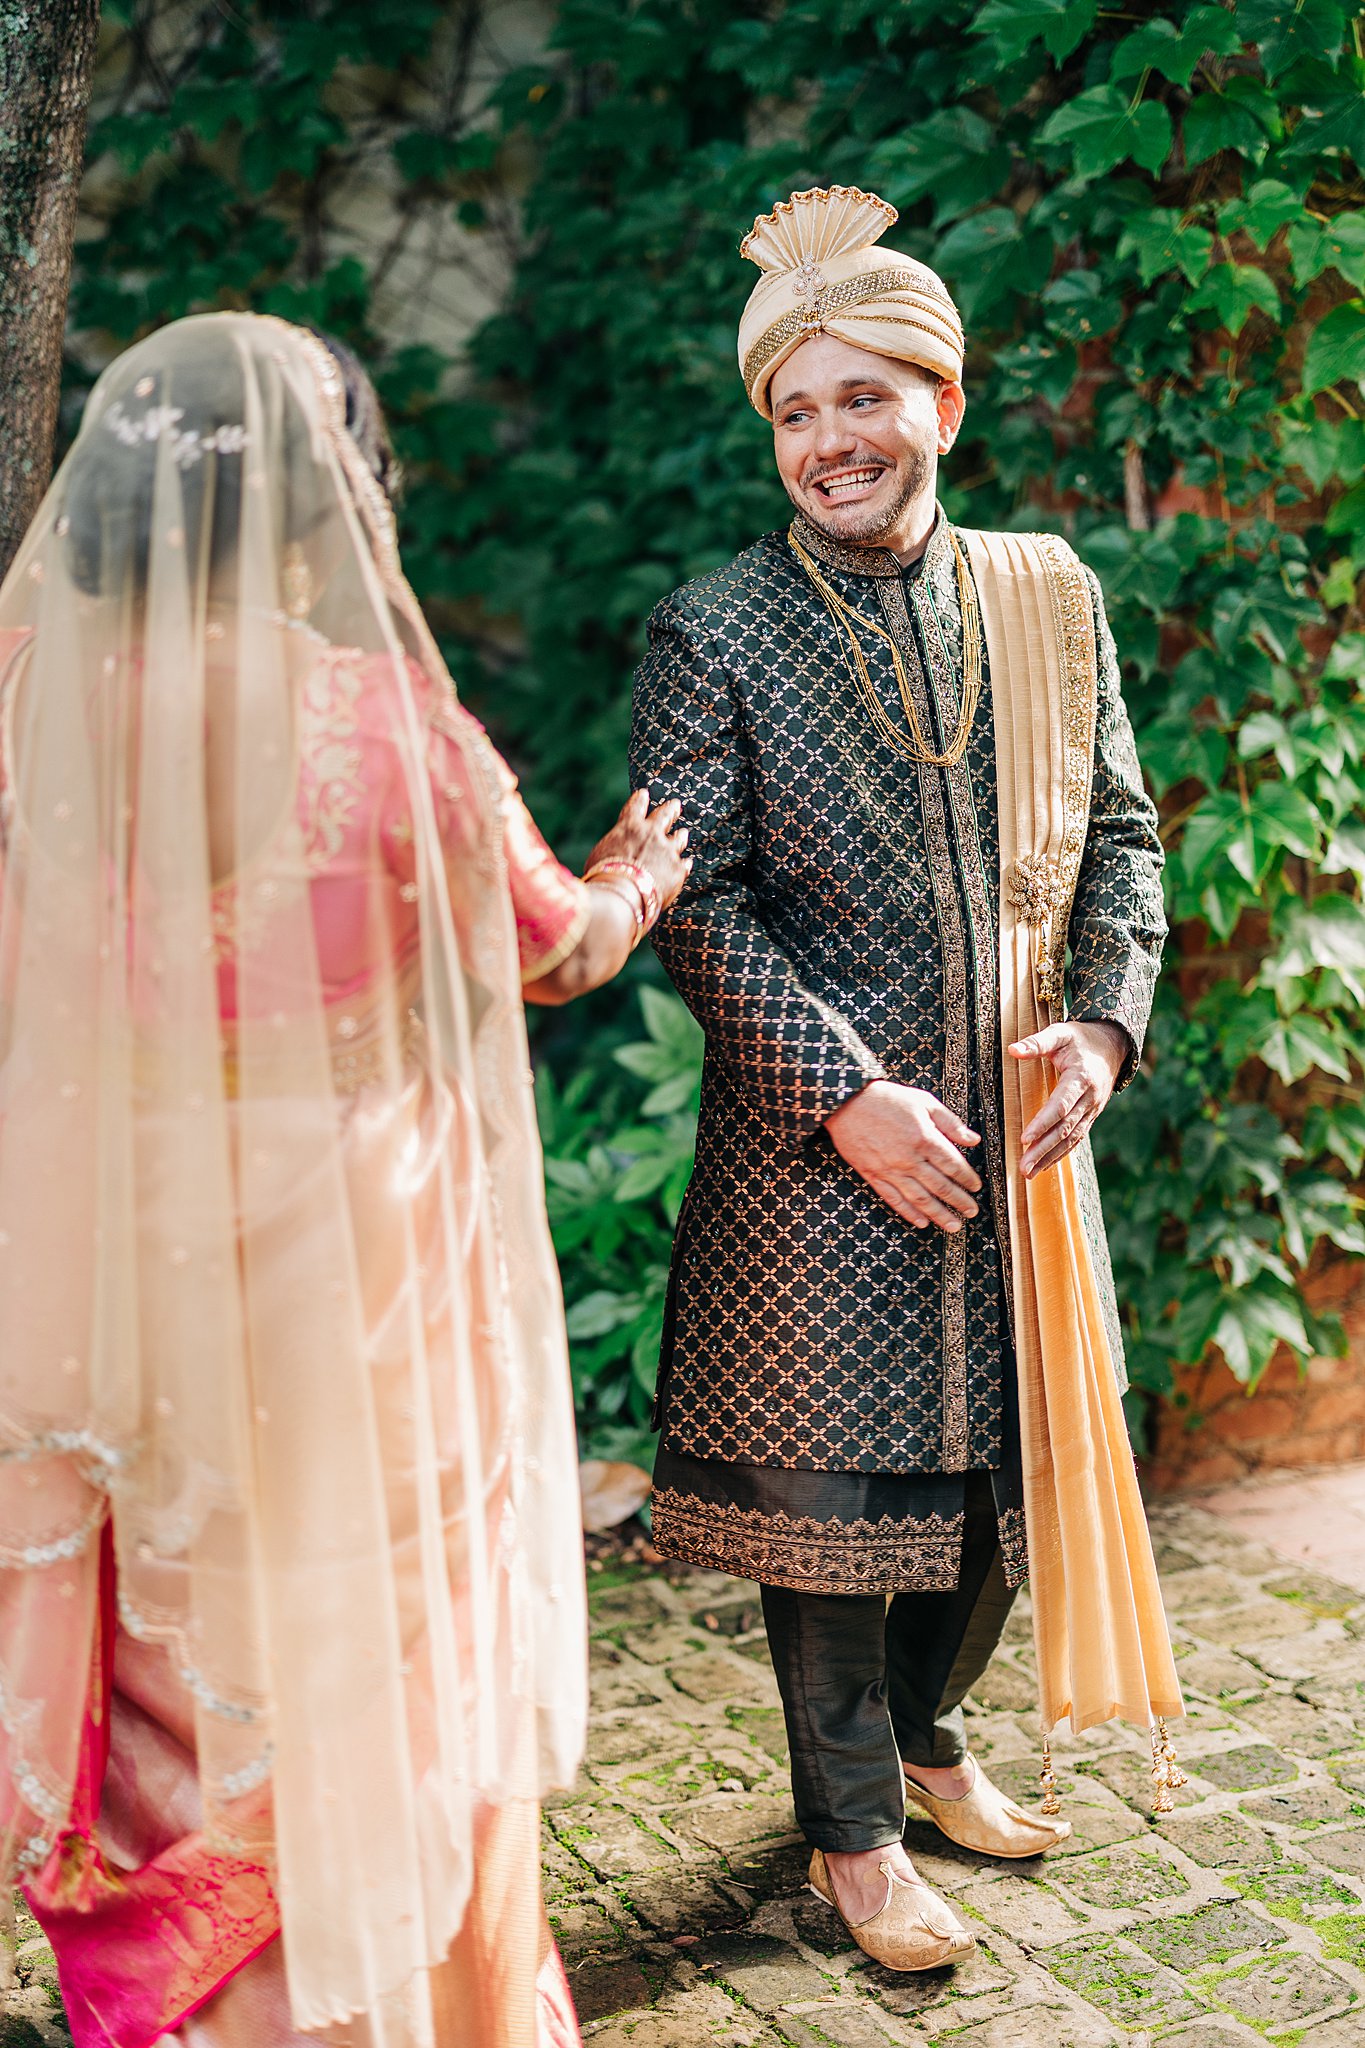 A groom smiles big during his first look with his bride in a pink traditional wedding dress